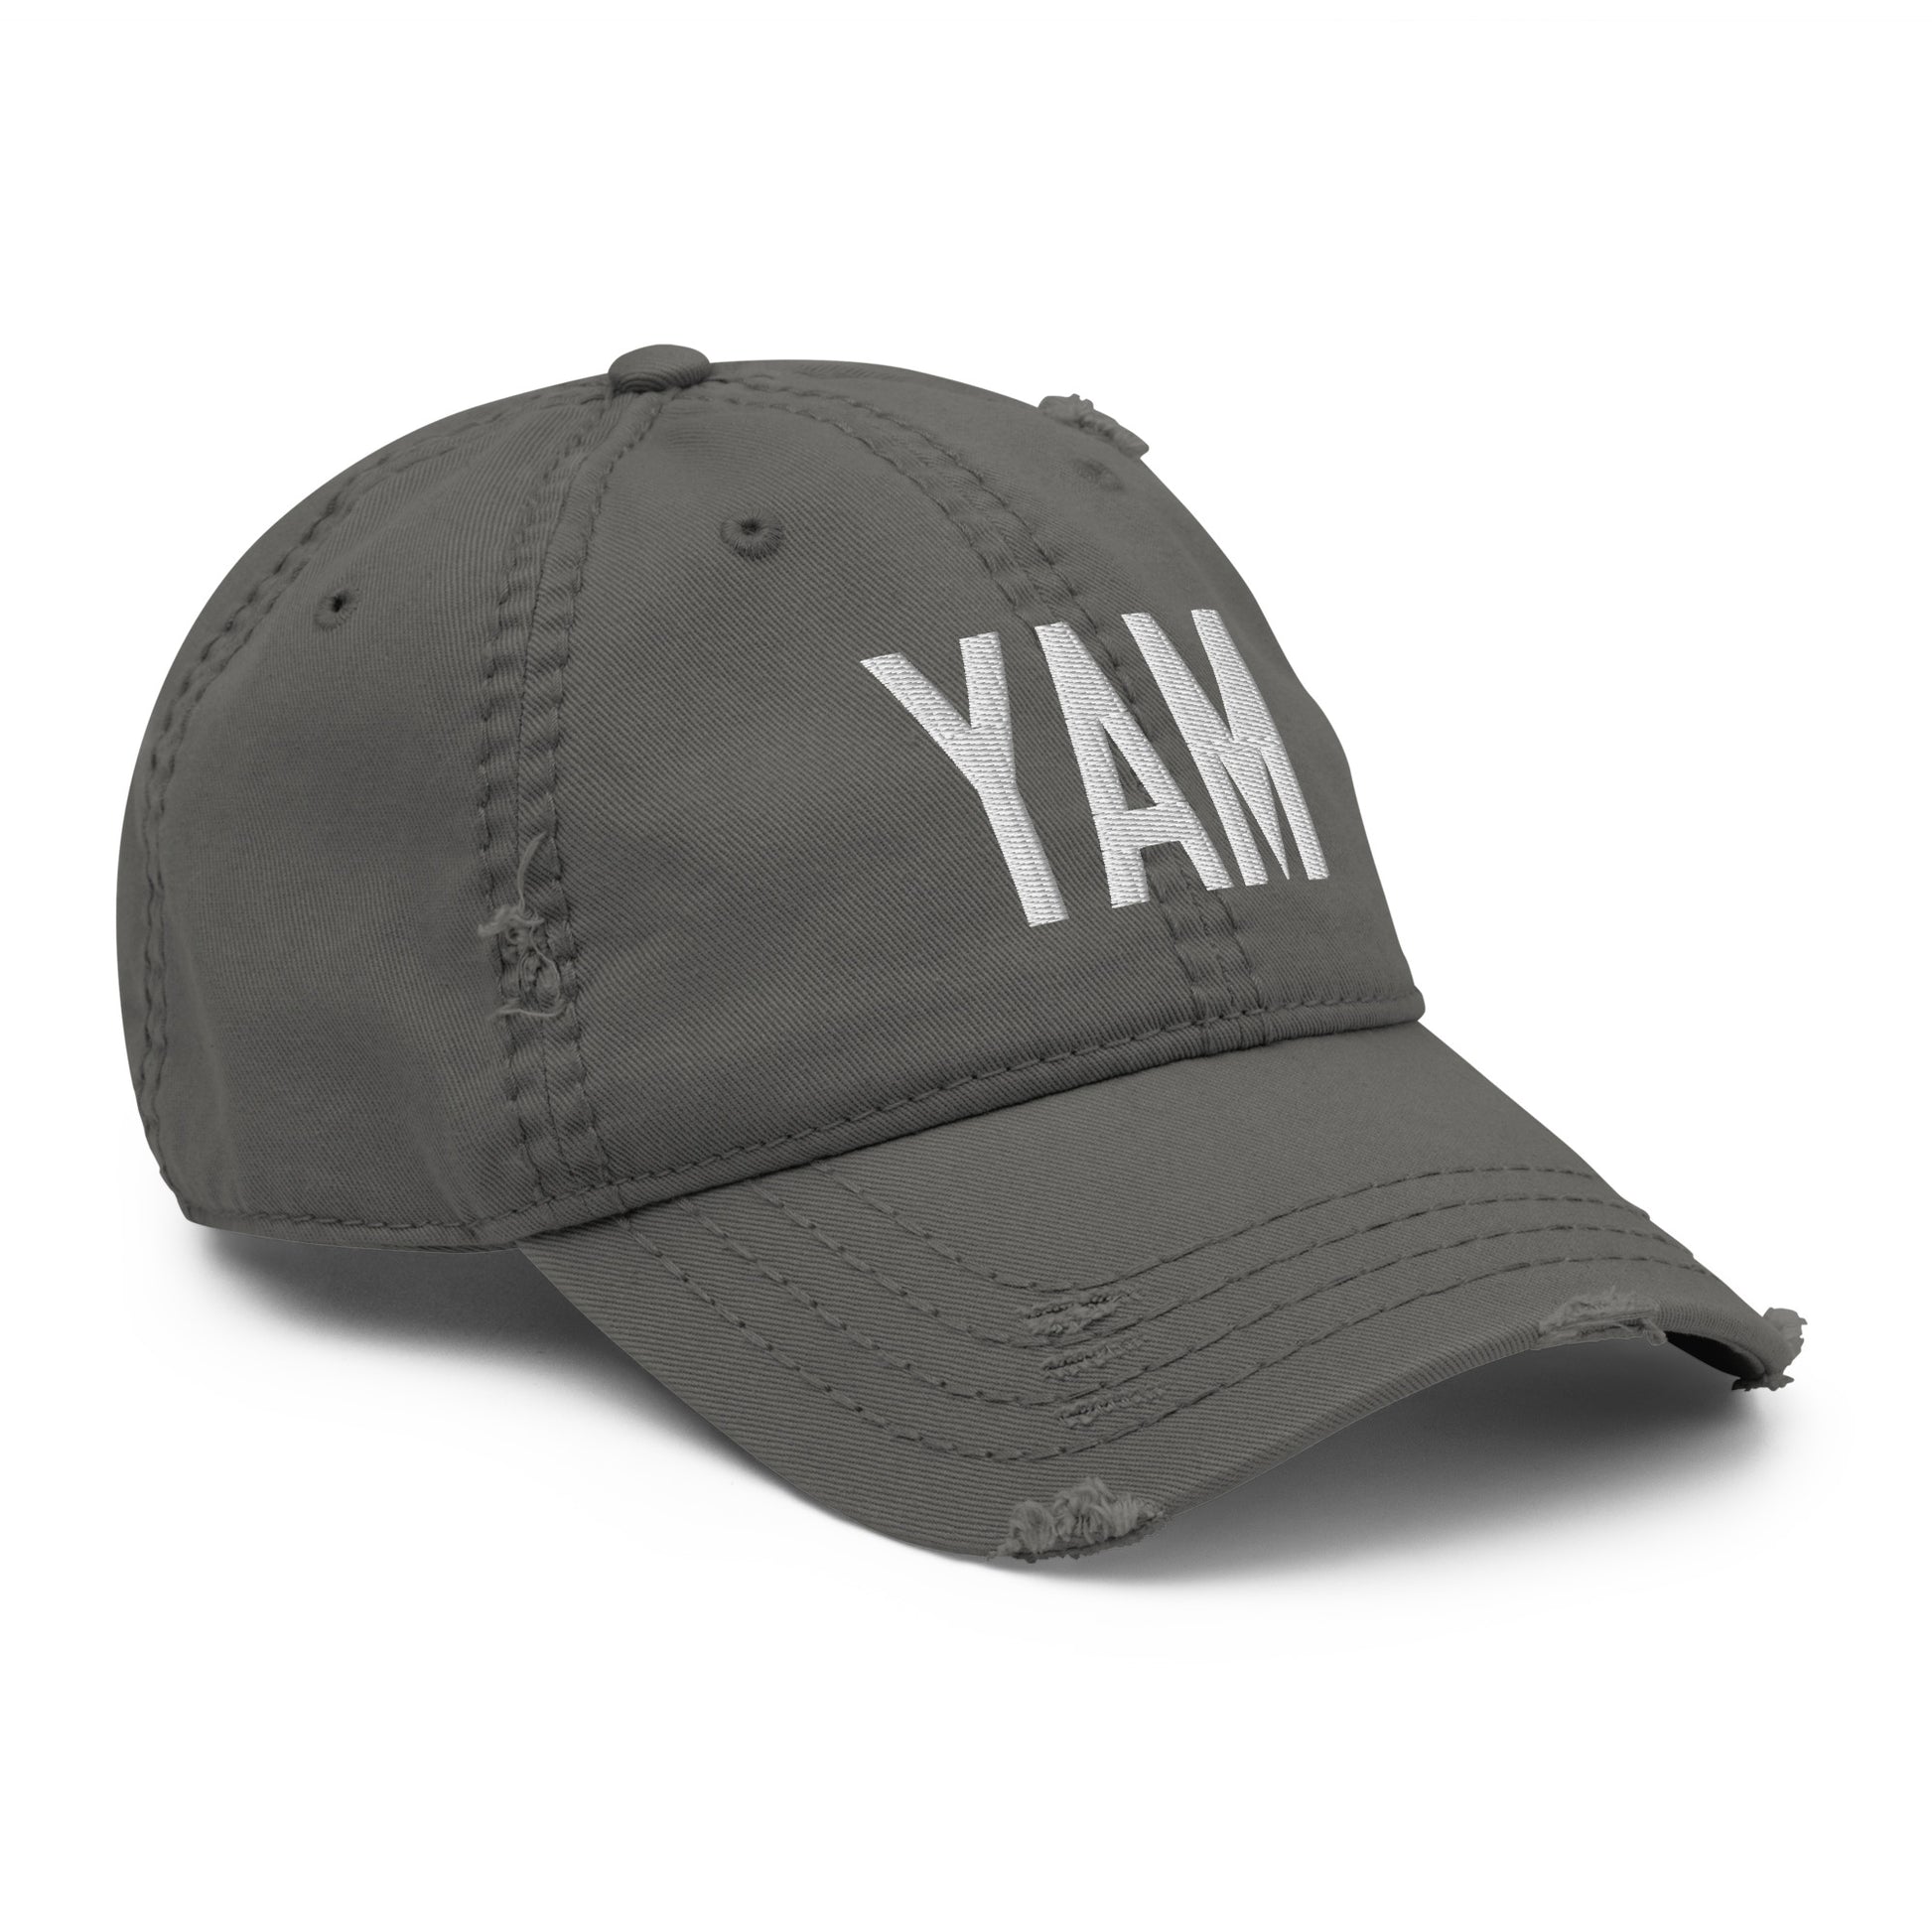 Airport Code Distressed Hat - White • YAM Sault-Ste-Marie • YHM Designs - Image 17